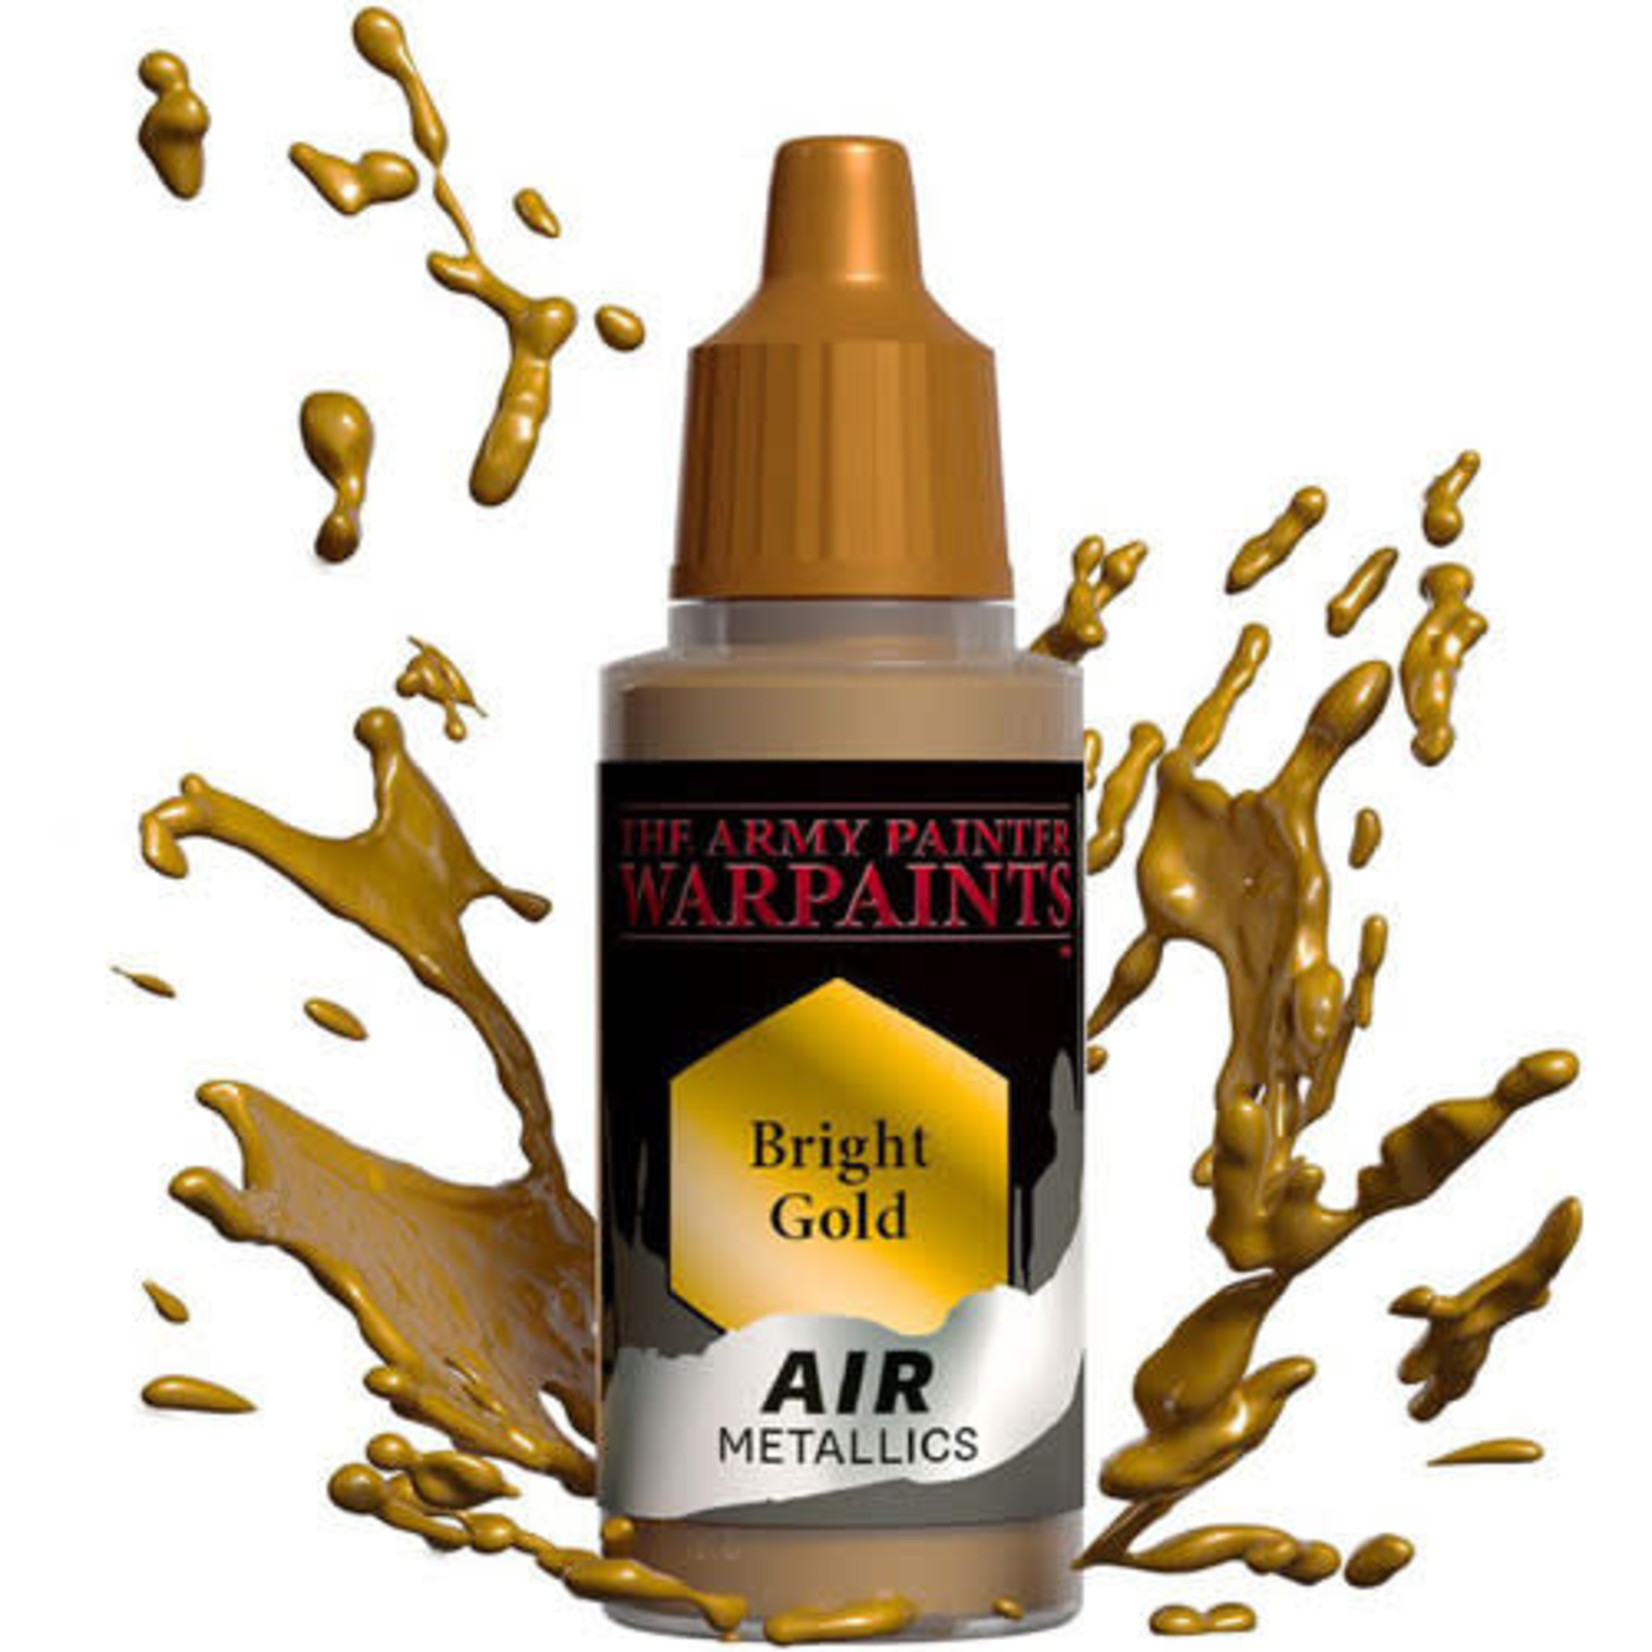 Army Painter Warpaints Air: Bright Gold 18ml